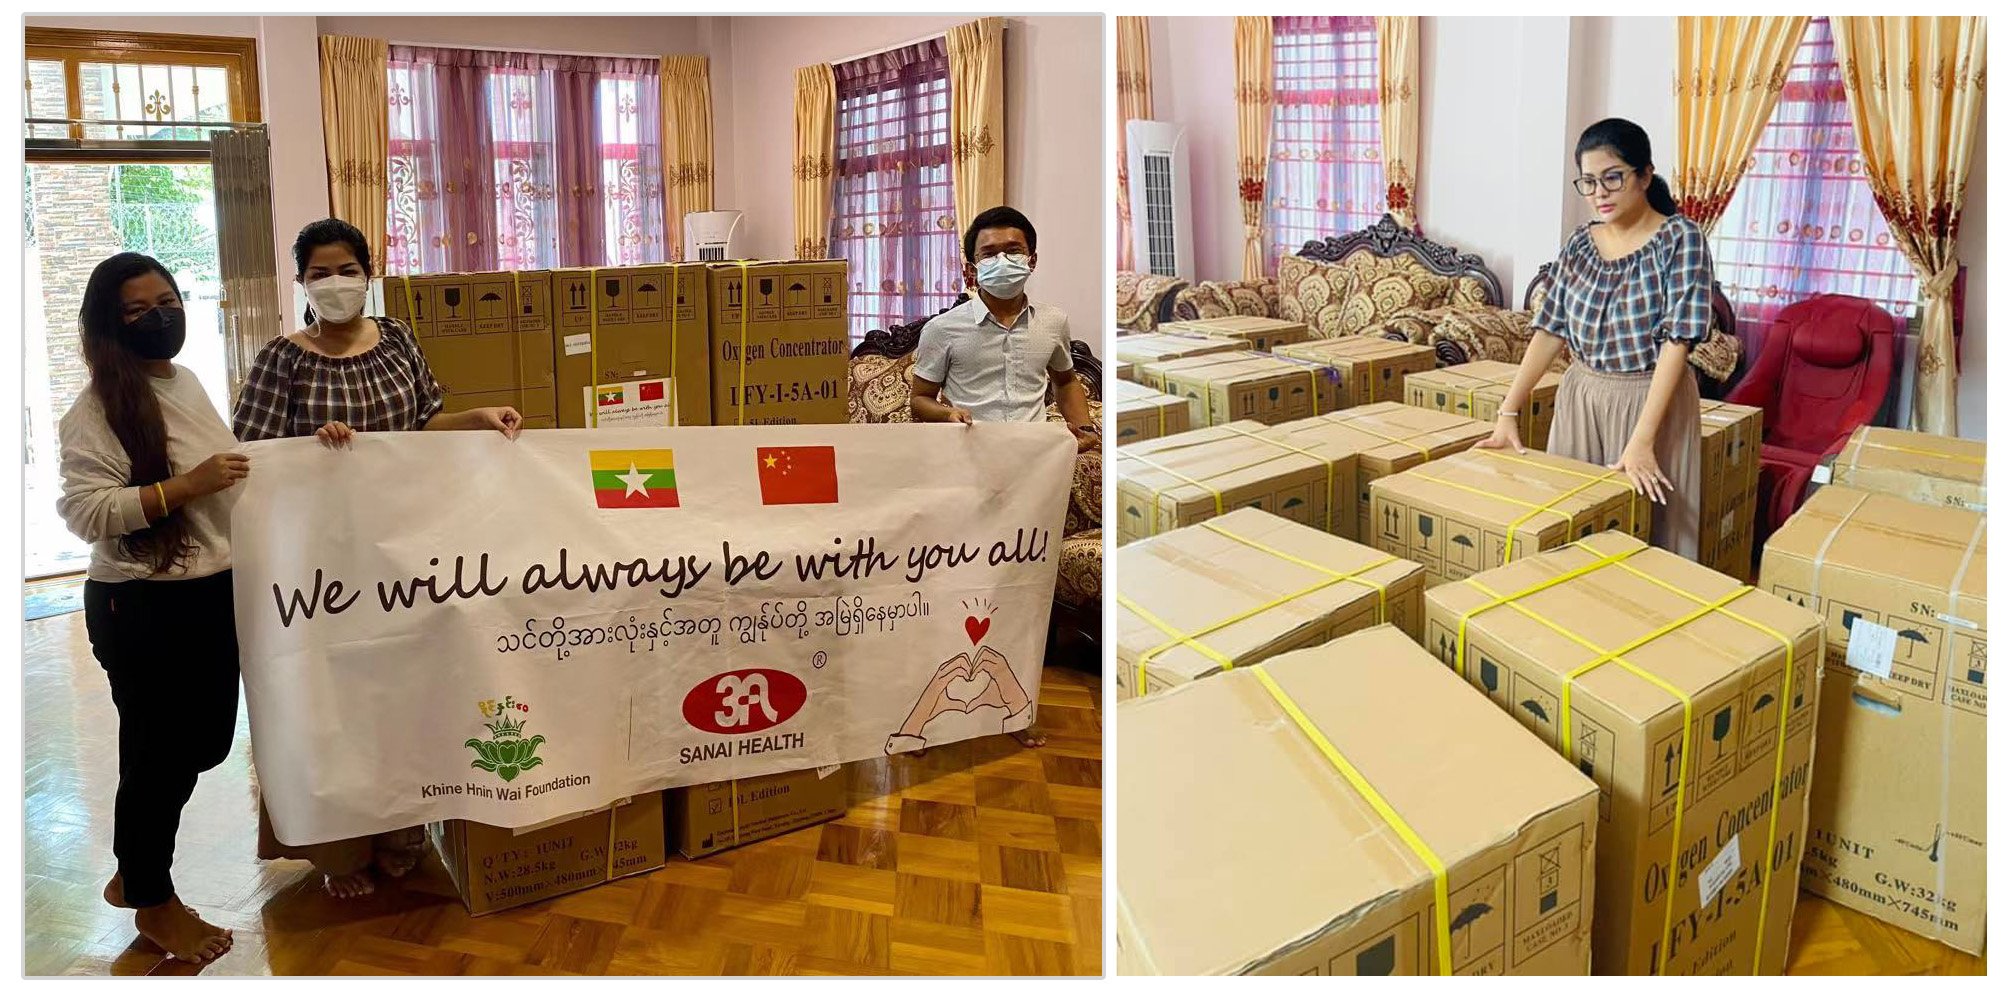 We will always be with you all! Another shipment of our oxygen concentrators arrives in Myanmar